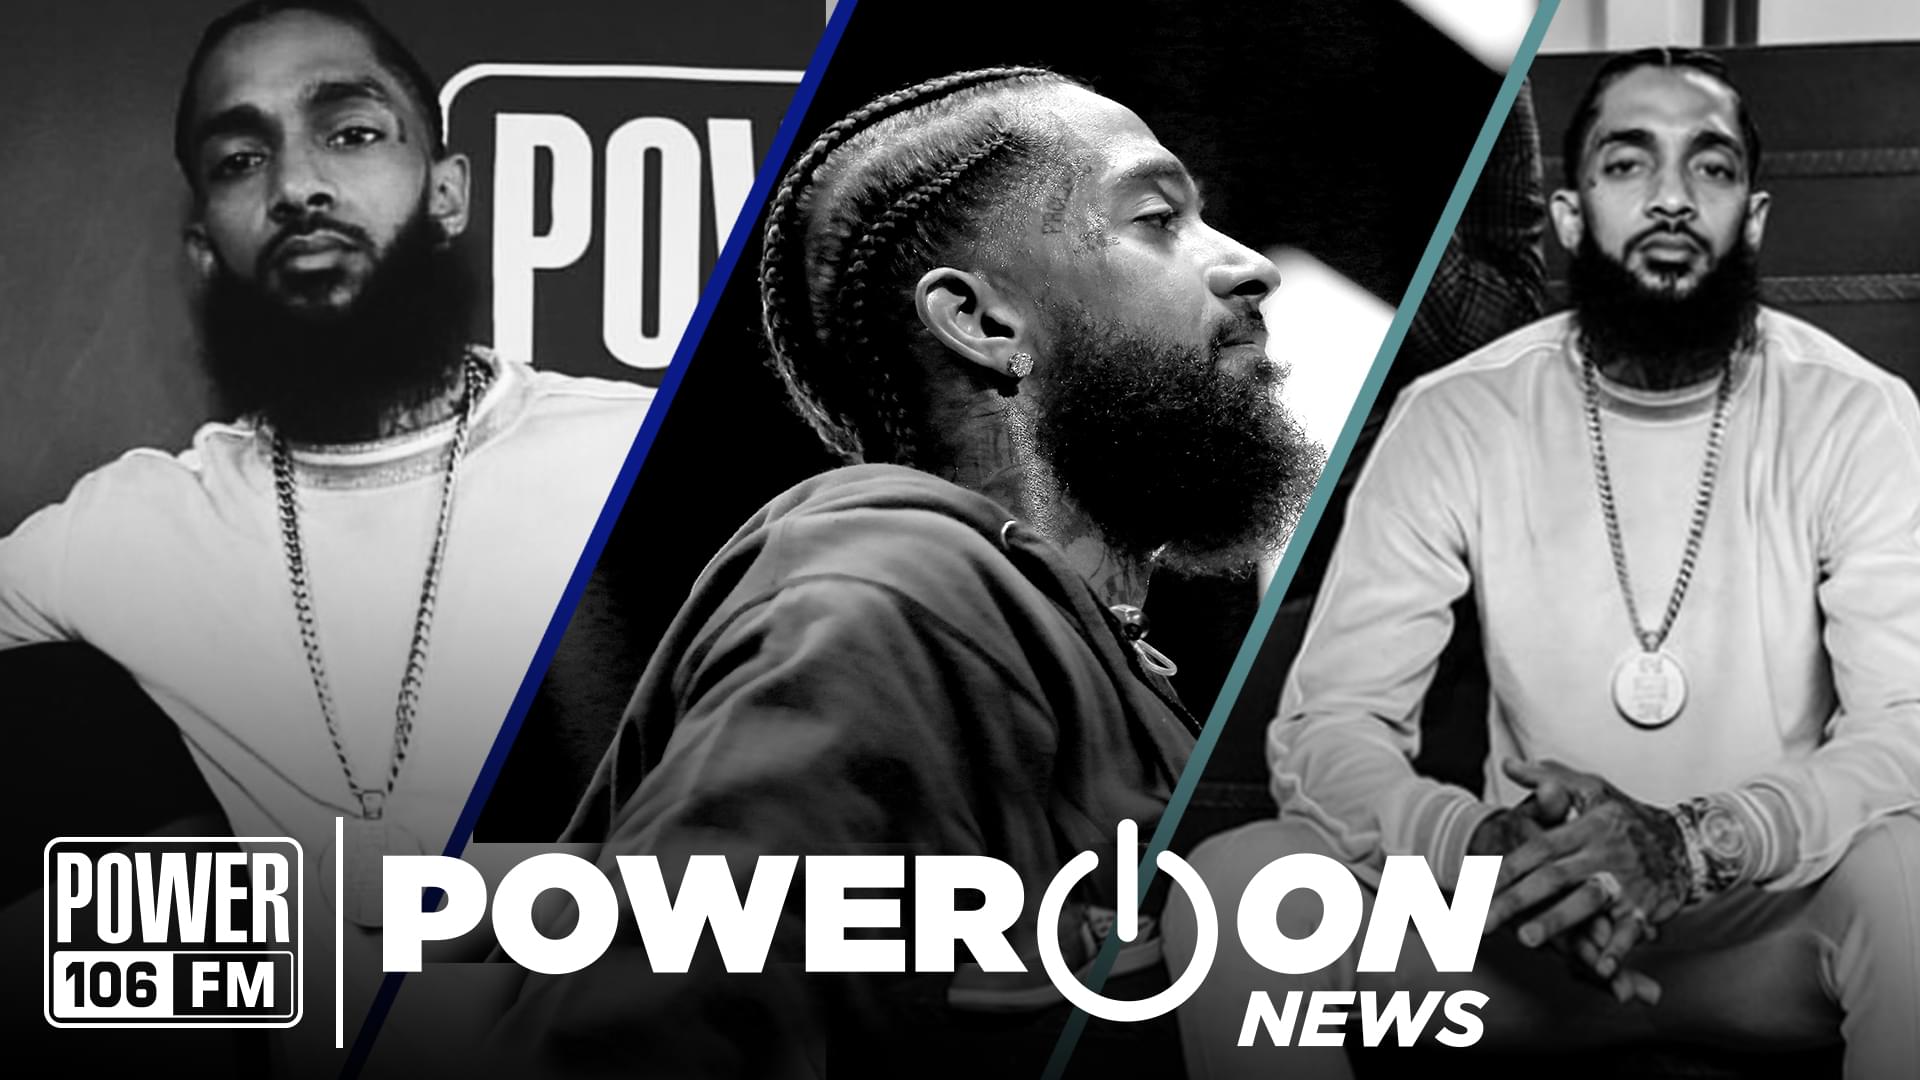 #PowerOn: Nipsey Hussle’s Memorial Service Brings Thousands Together in LA + The Marathon Continues